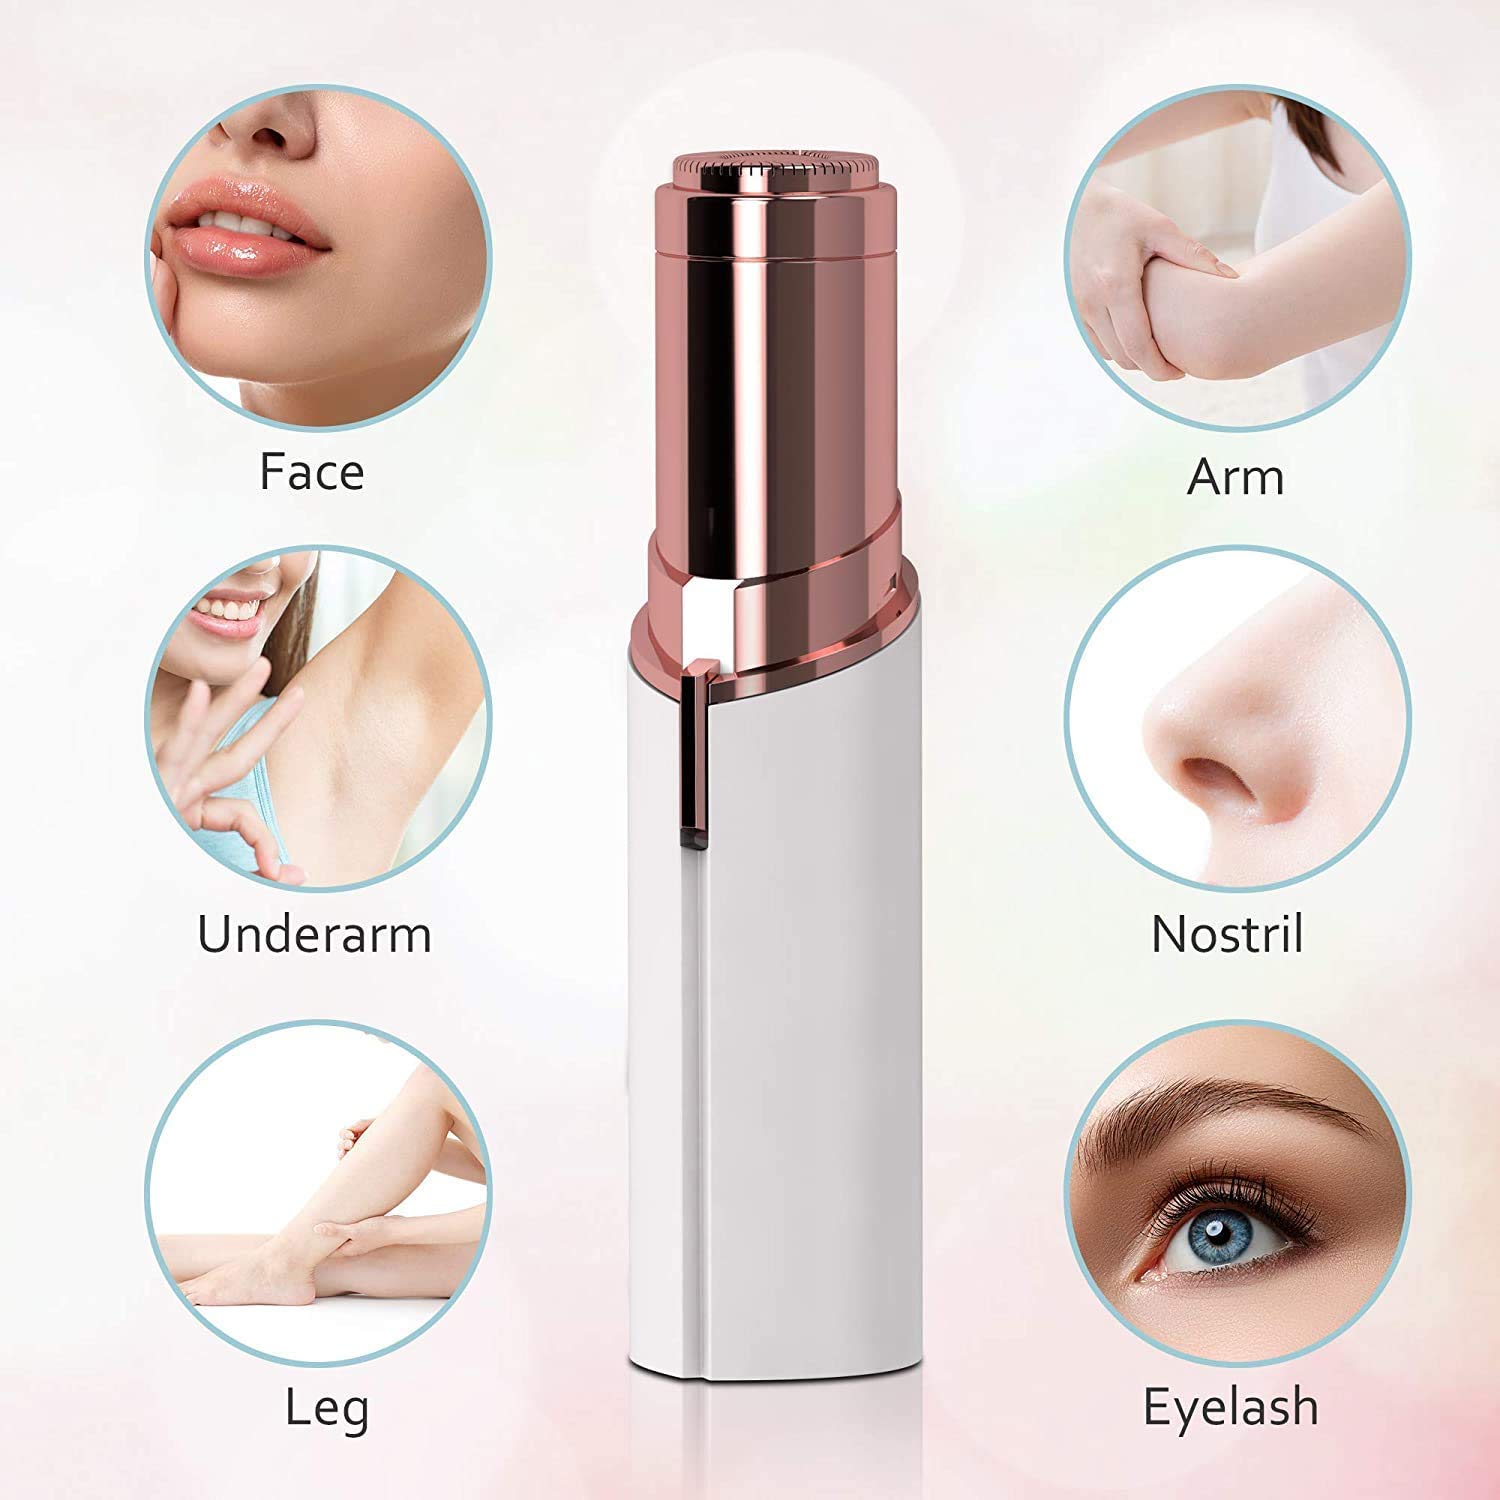 VIO Finishing Touch Facial Body Flawless Shaver Women Painless Hair Remover Face Hair Remover and Eyebrow Trimmer, Hair Shaver and Remover, Lipstick Style